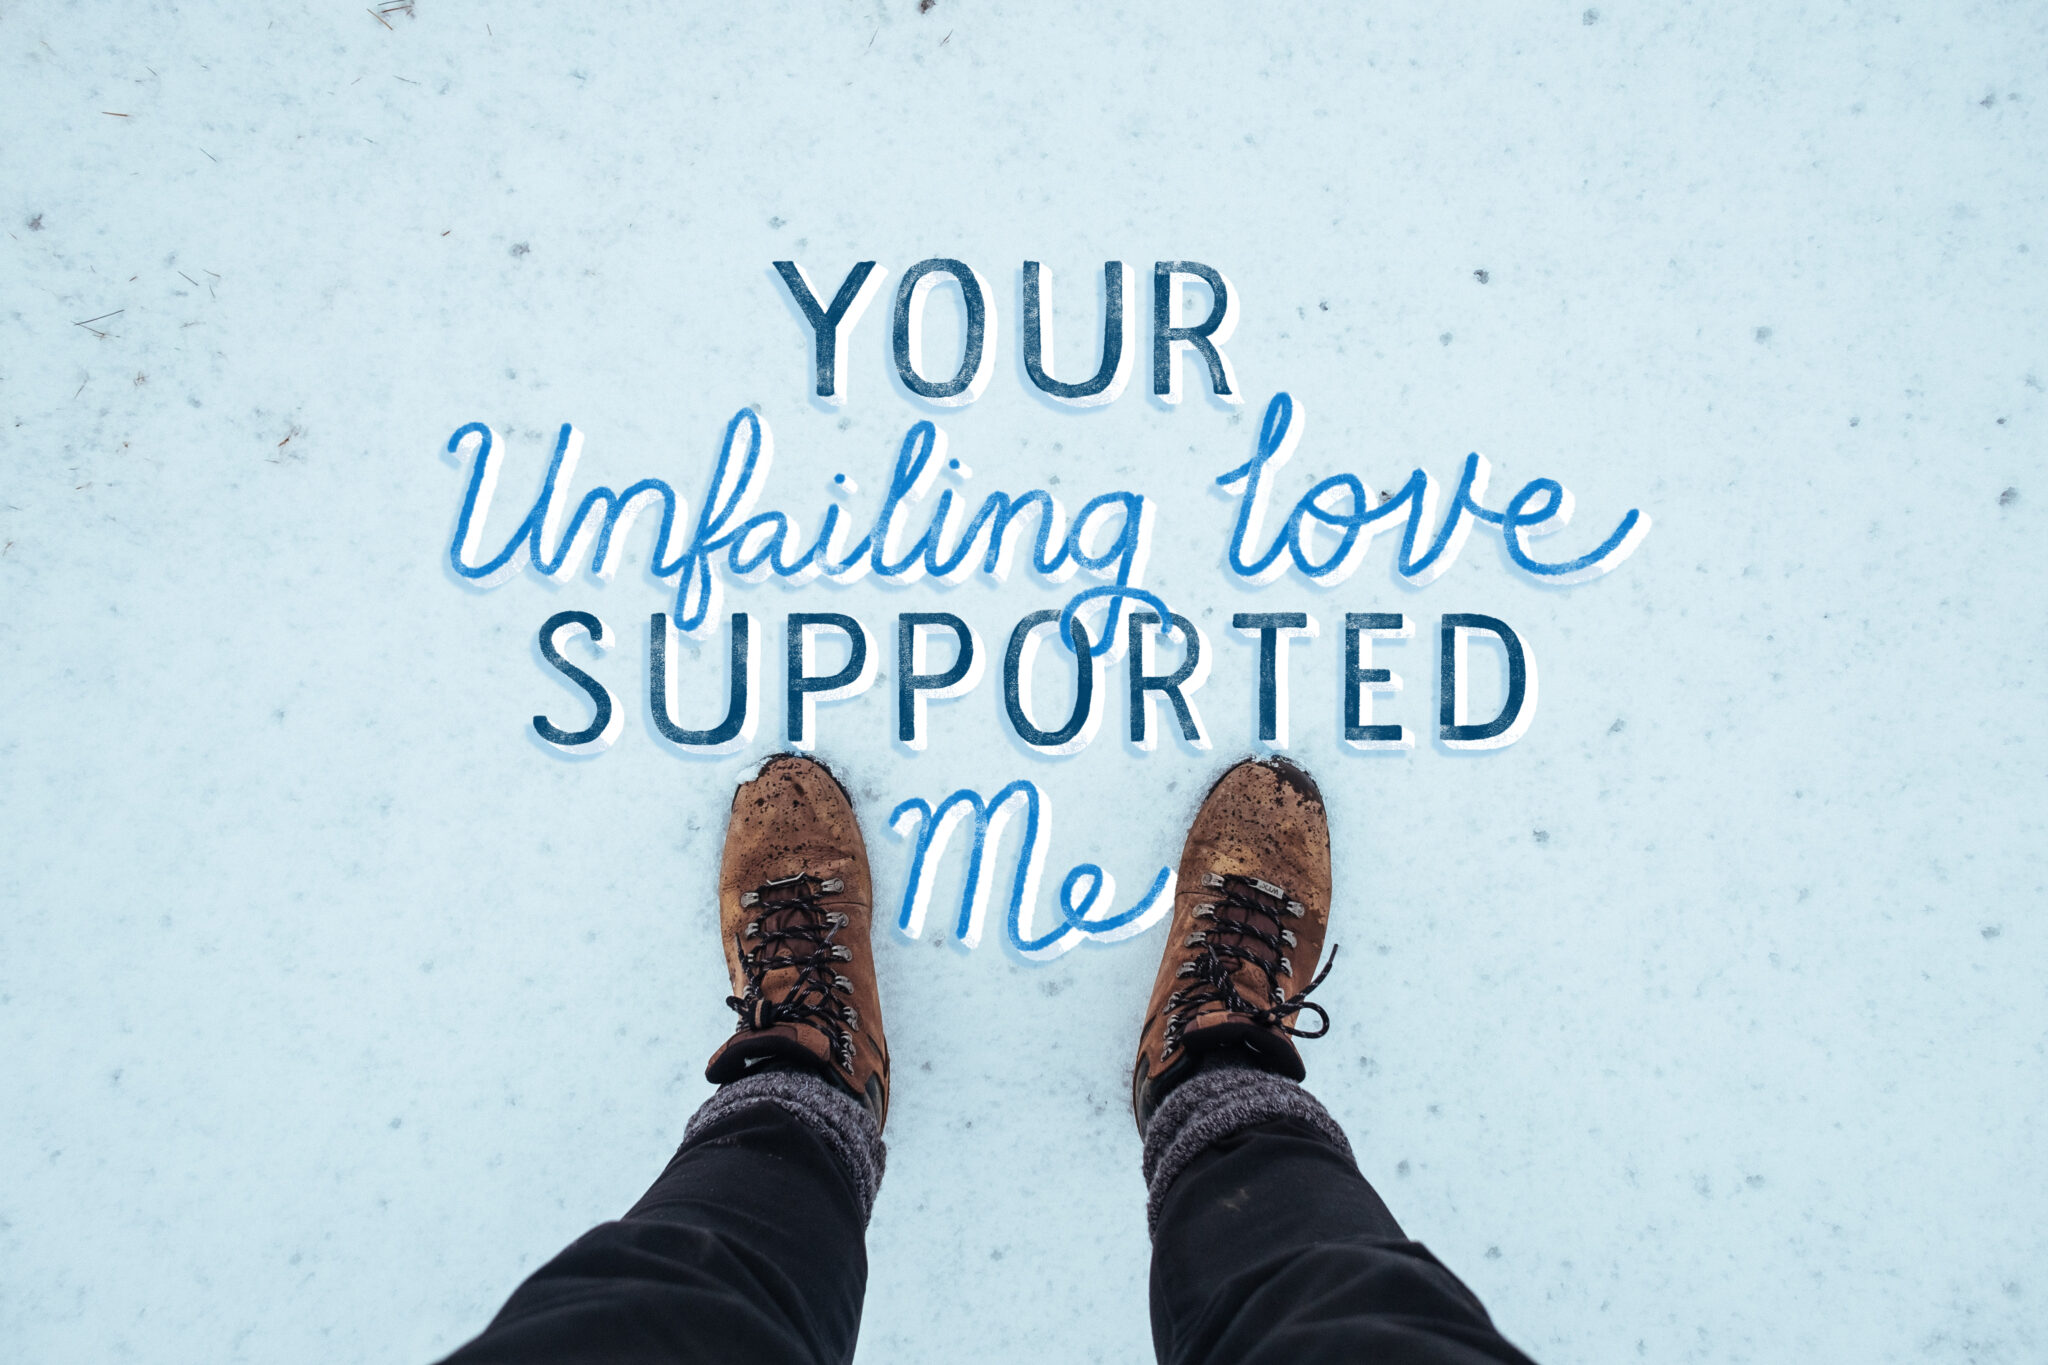 The camera is looking down at a person's feet and leggings as they stand in the snow. Hand lettering reads "Your unfailing love supported me."